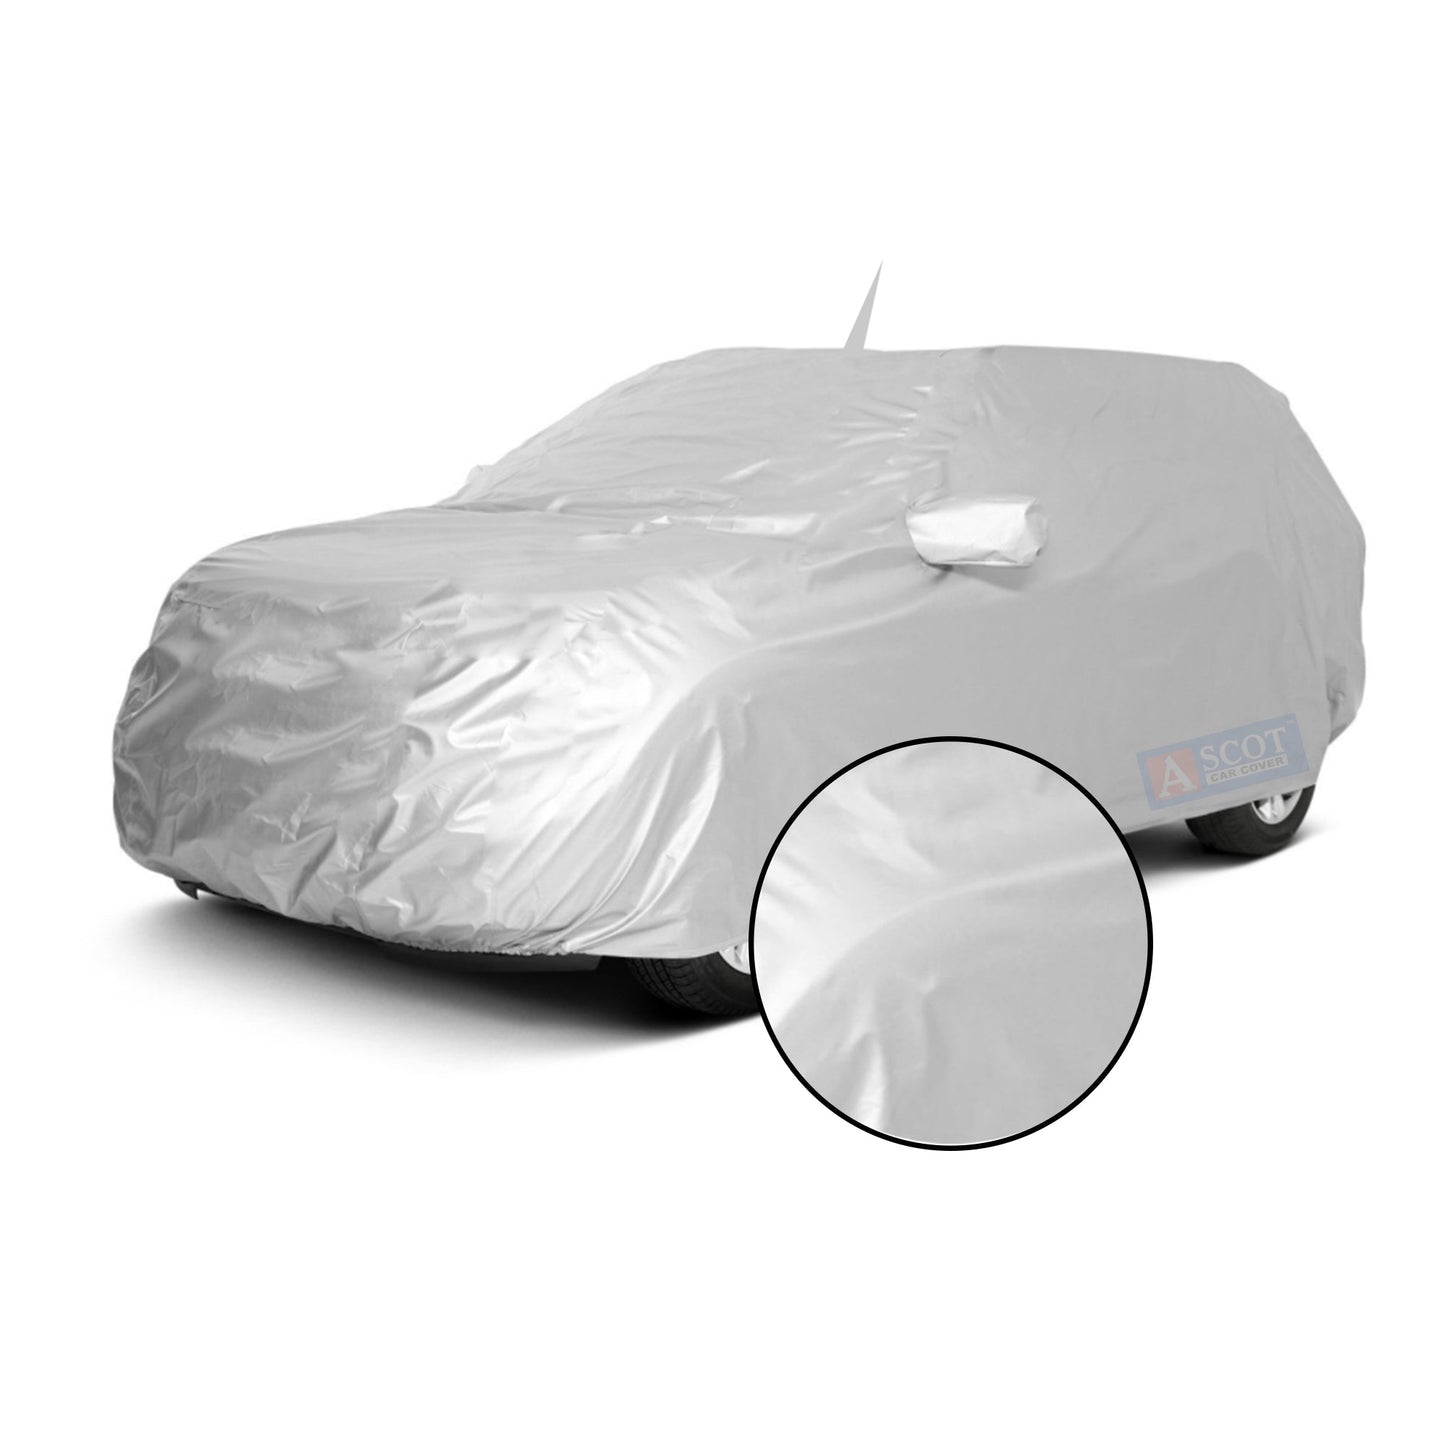 Ascot Volkswagen The T-Roc Car Body Cover Dust Proof, Trippel Stitched